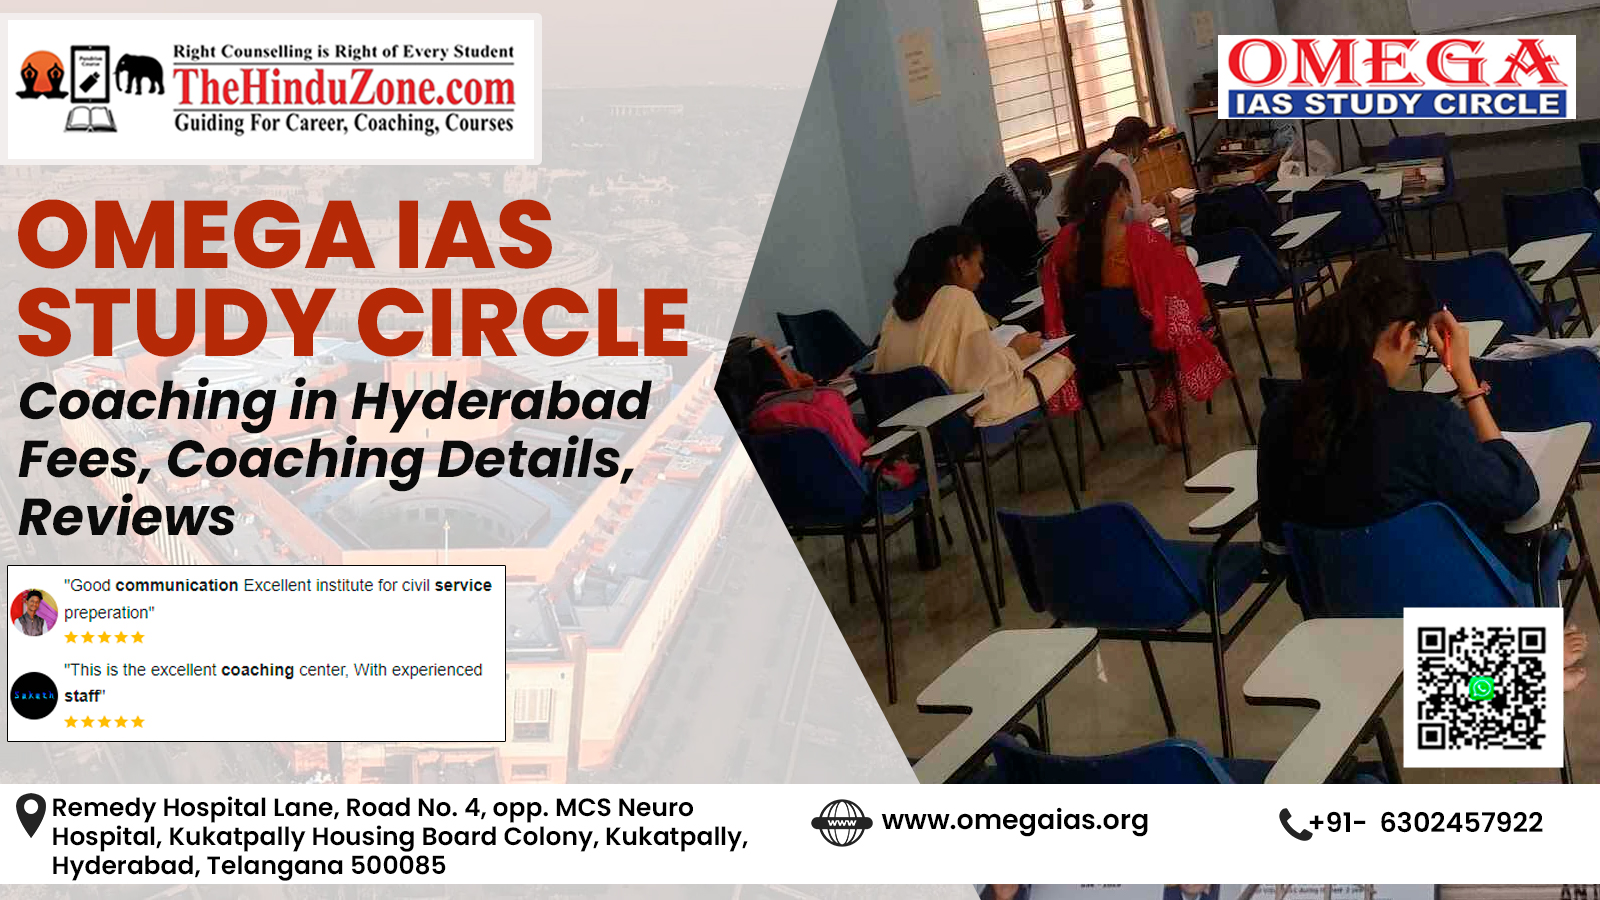 Omega IAS Study Circle Coaching in Hyderabad Fees, Coaching Details, Reviews